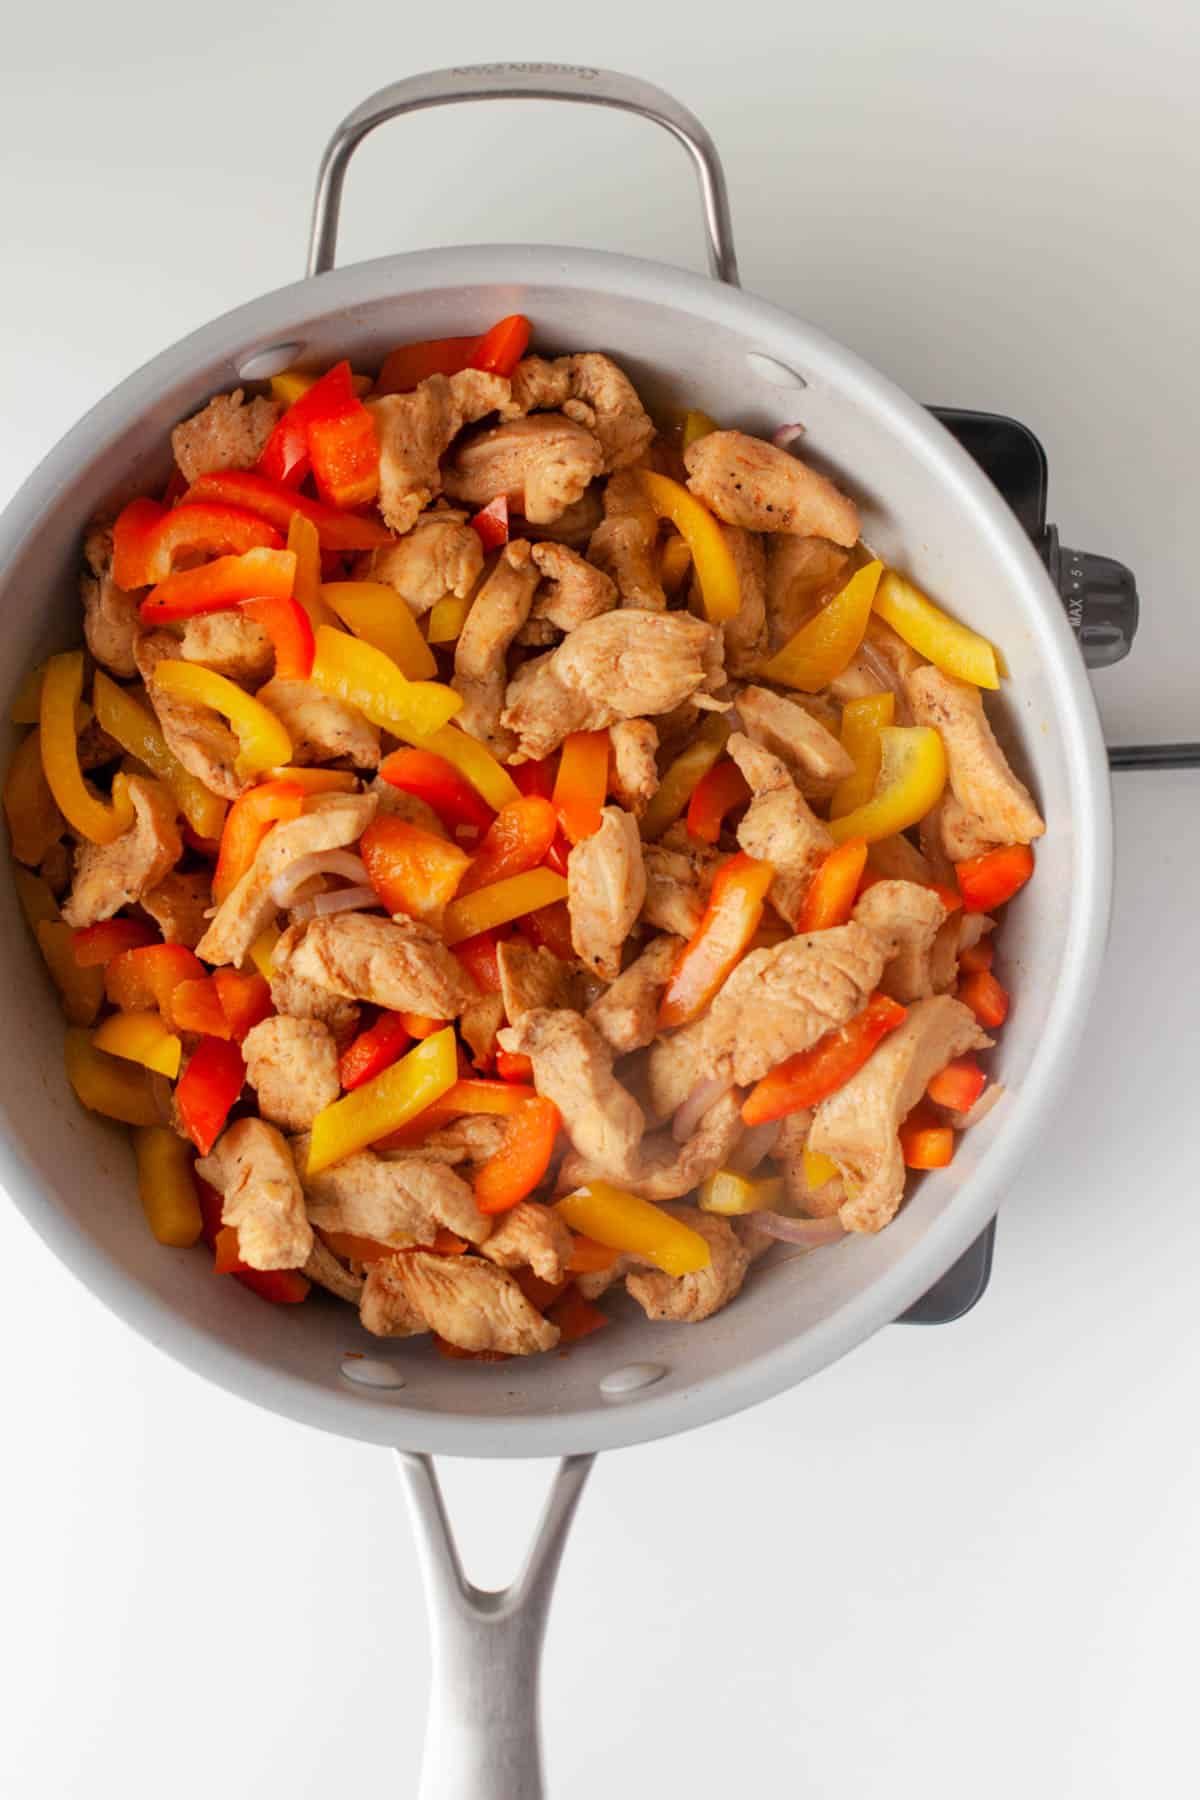 Finished chicken fajitas in a skillet.